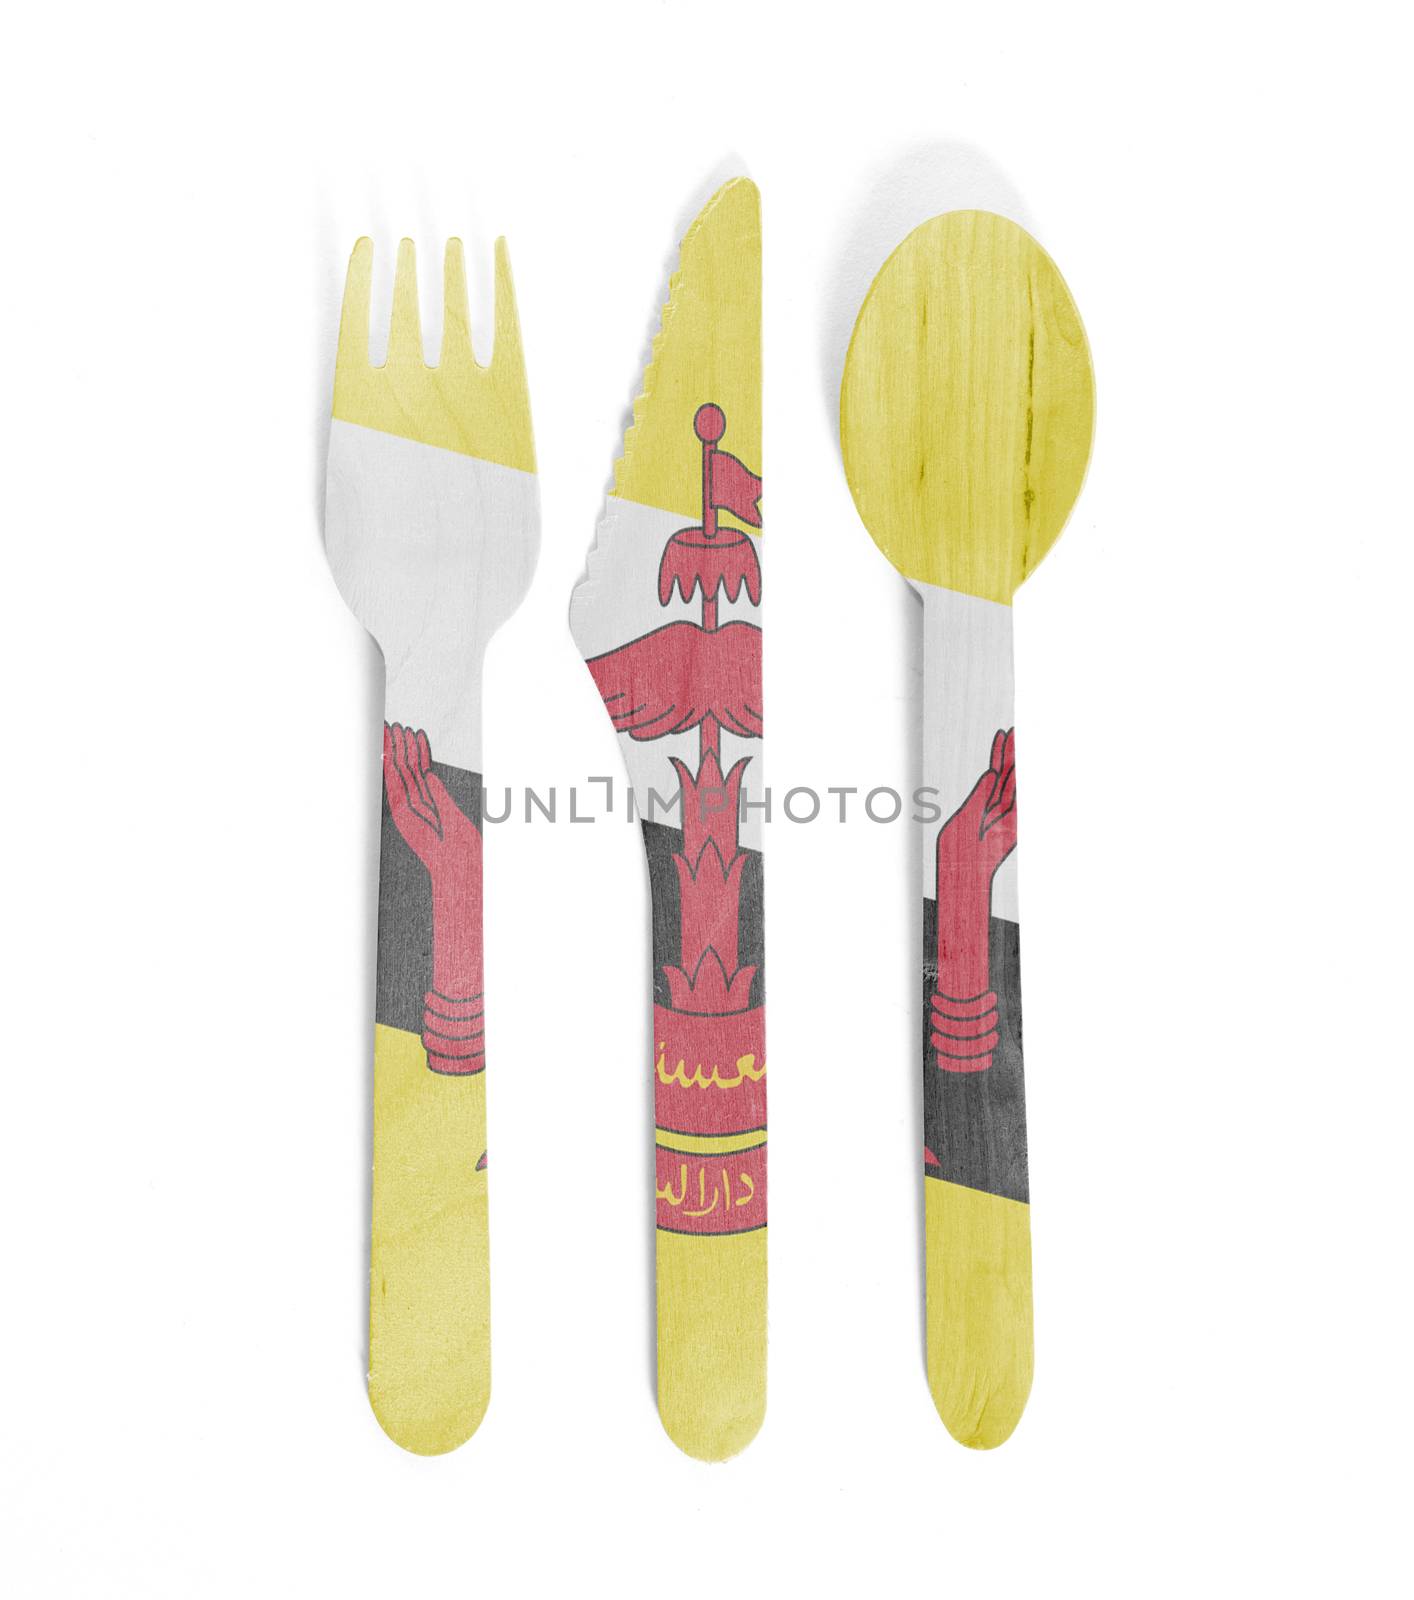 Eco friendly wooden cutlery - Plastic free concept - Isolated - Flag of Brunei